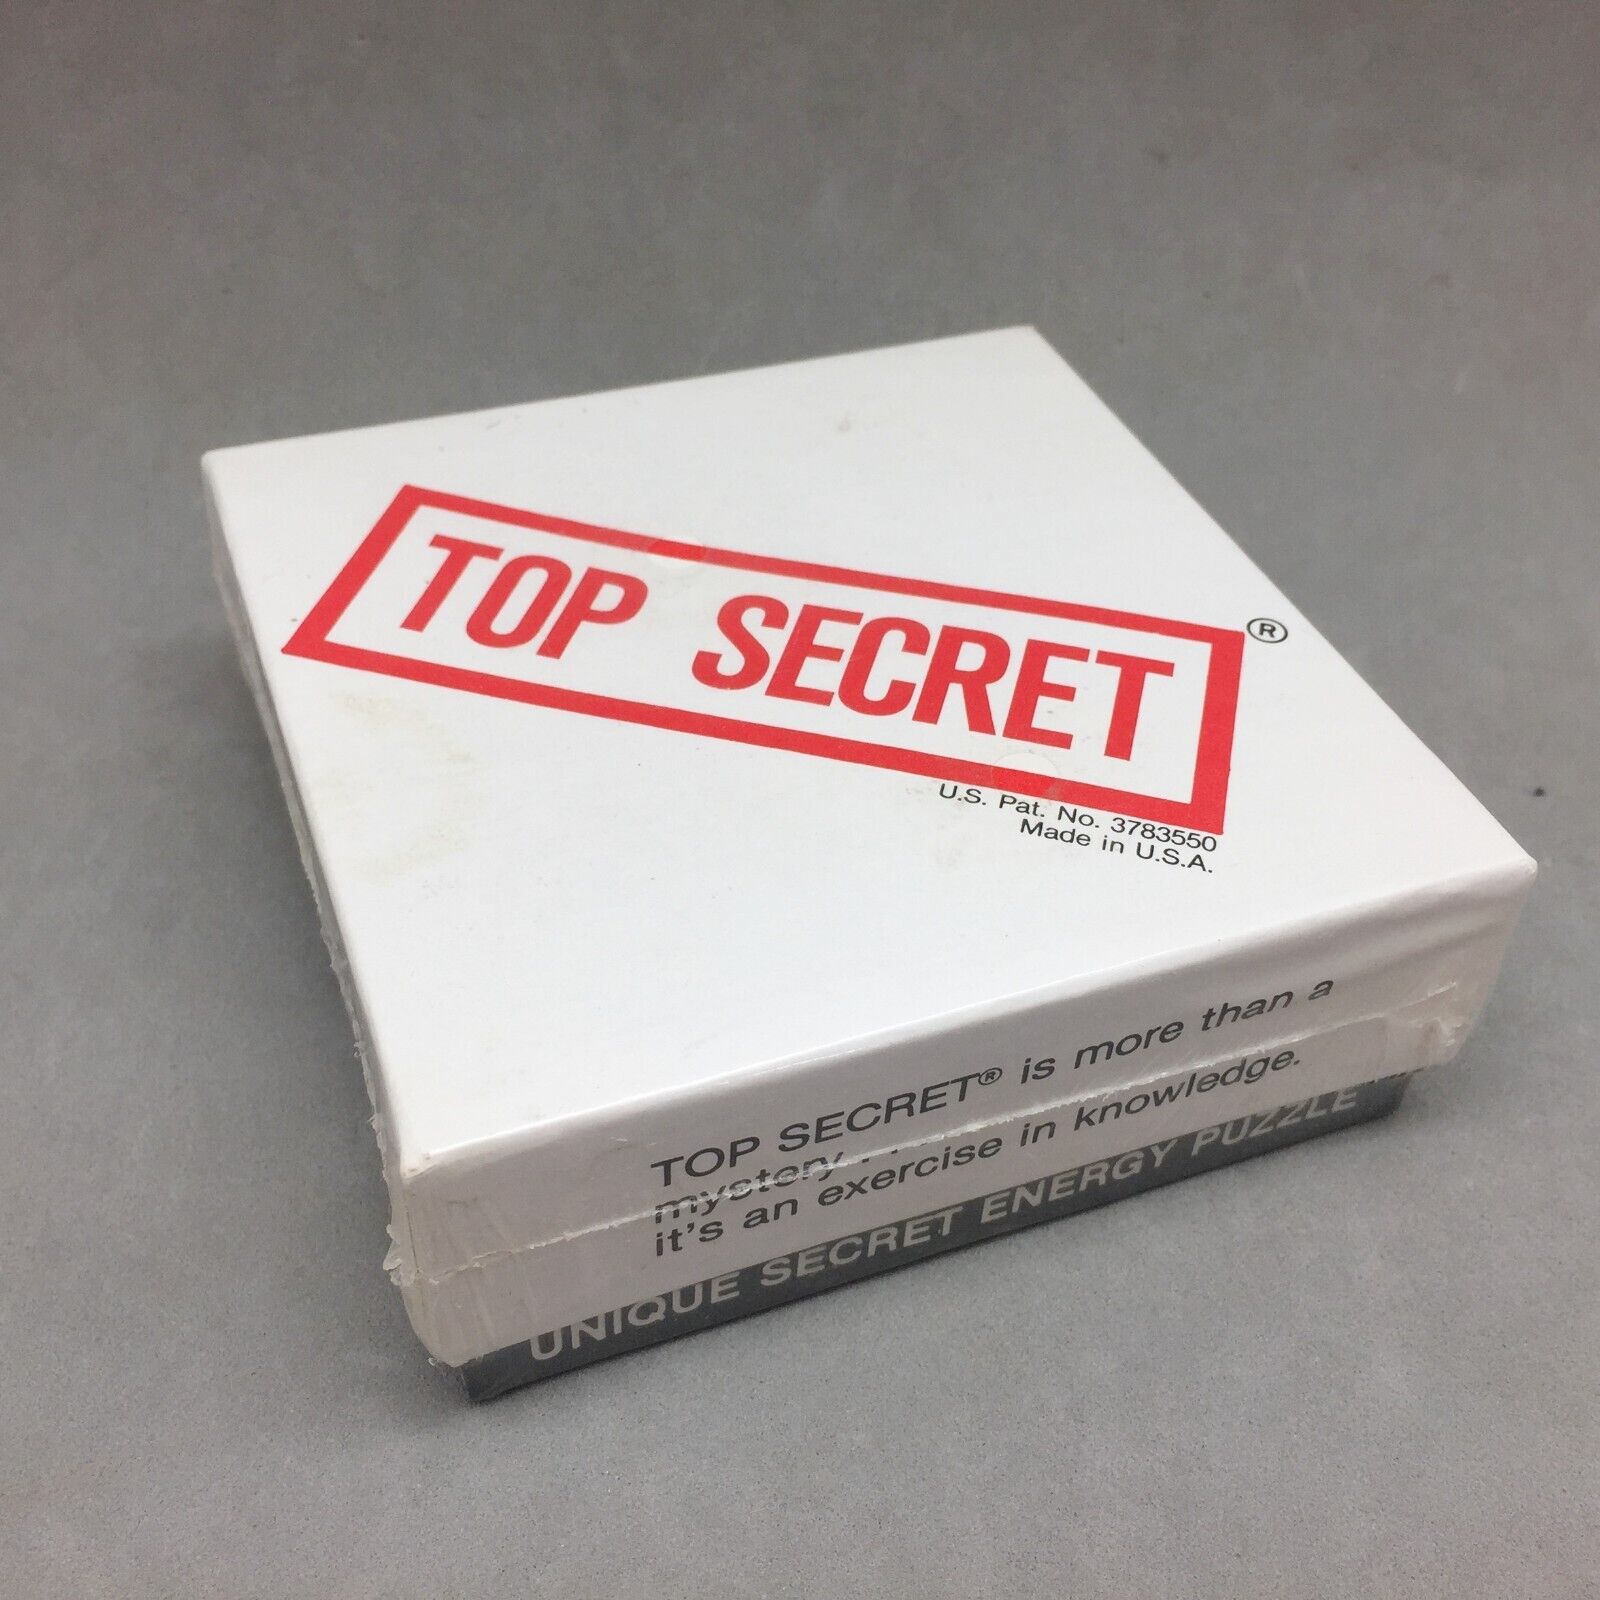 Top Secret Energy Puzzle Perpetual Motion Novelty Spinning Top Andrews Sealed